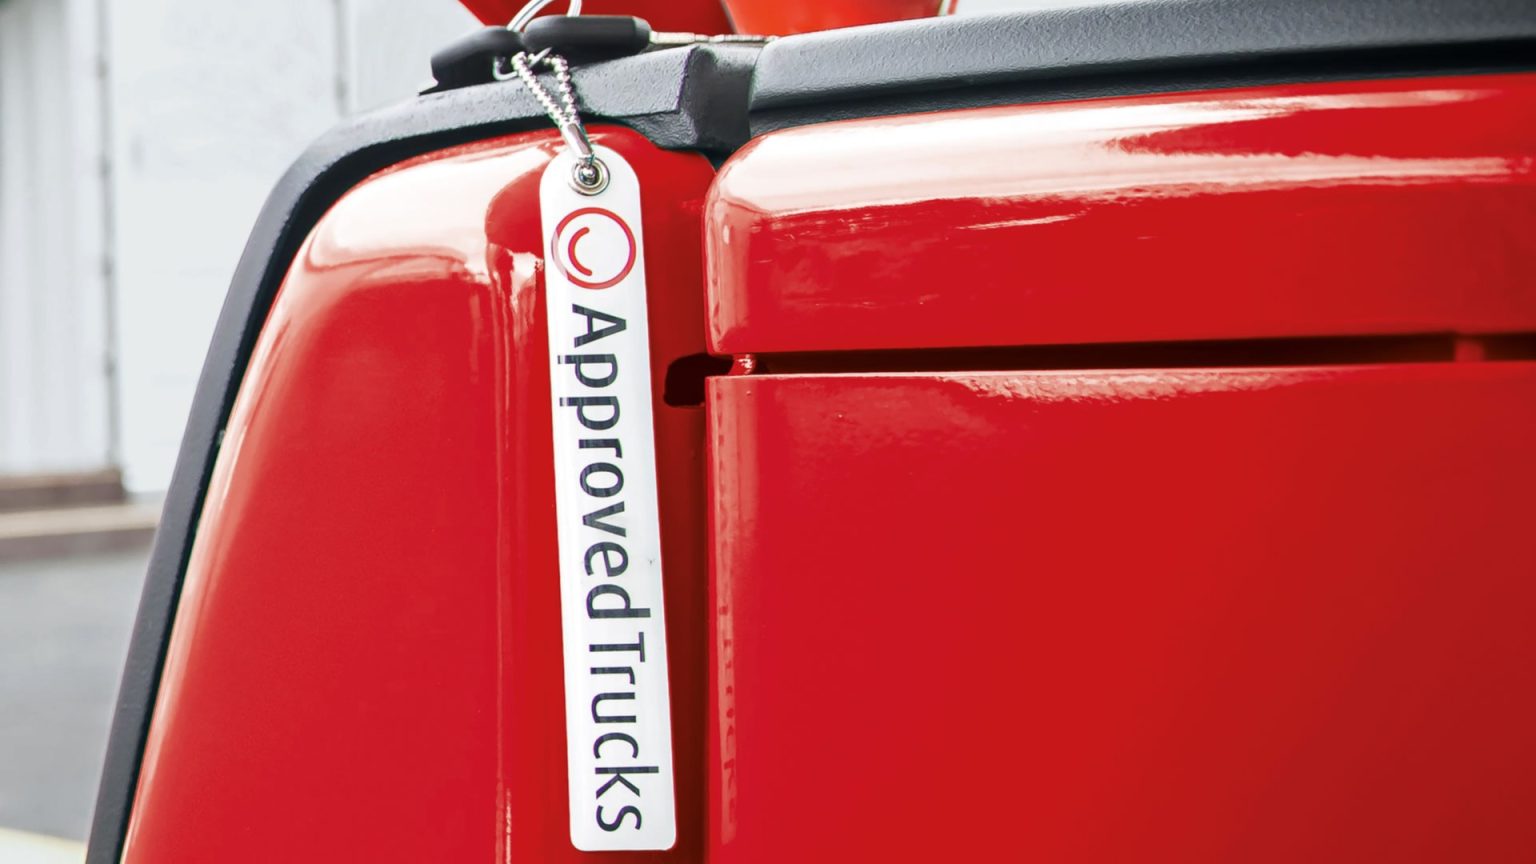 Linde Material Handling Restructures Its Used Truck Portfolio